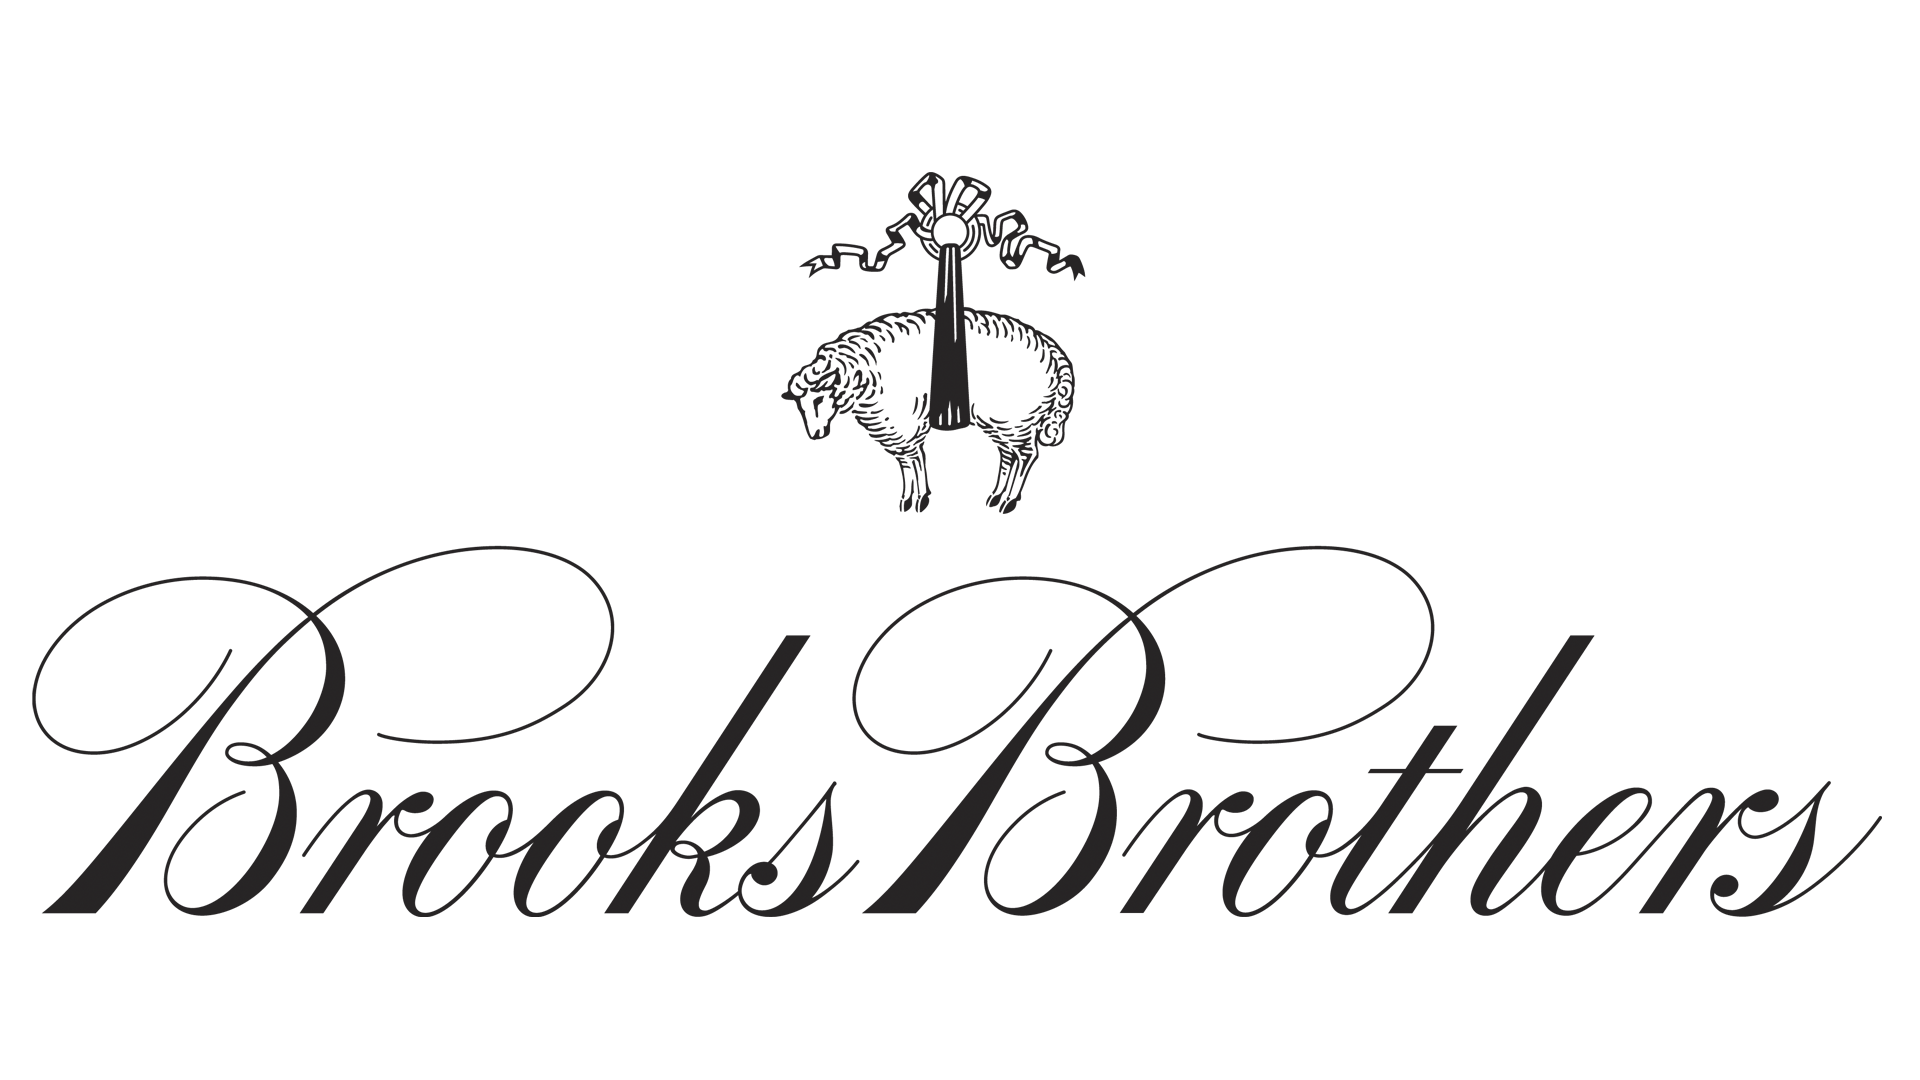 Brooks Brothers Coupons